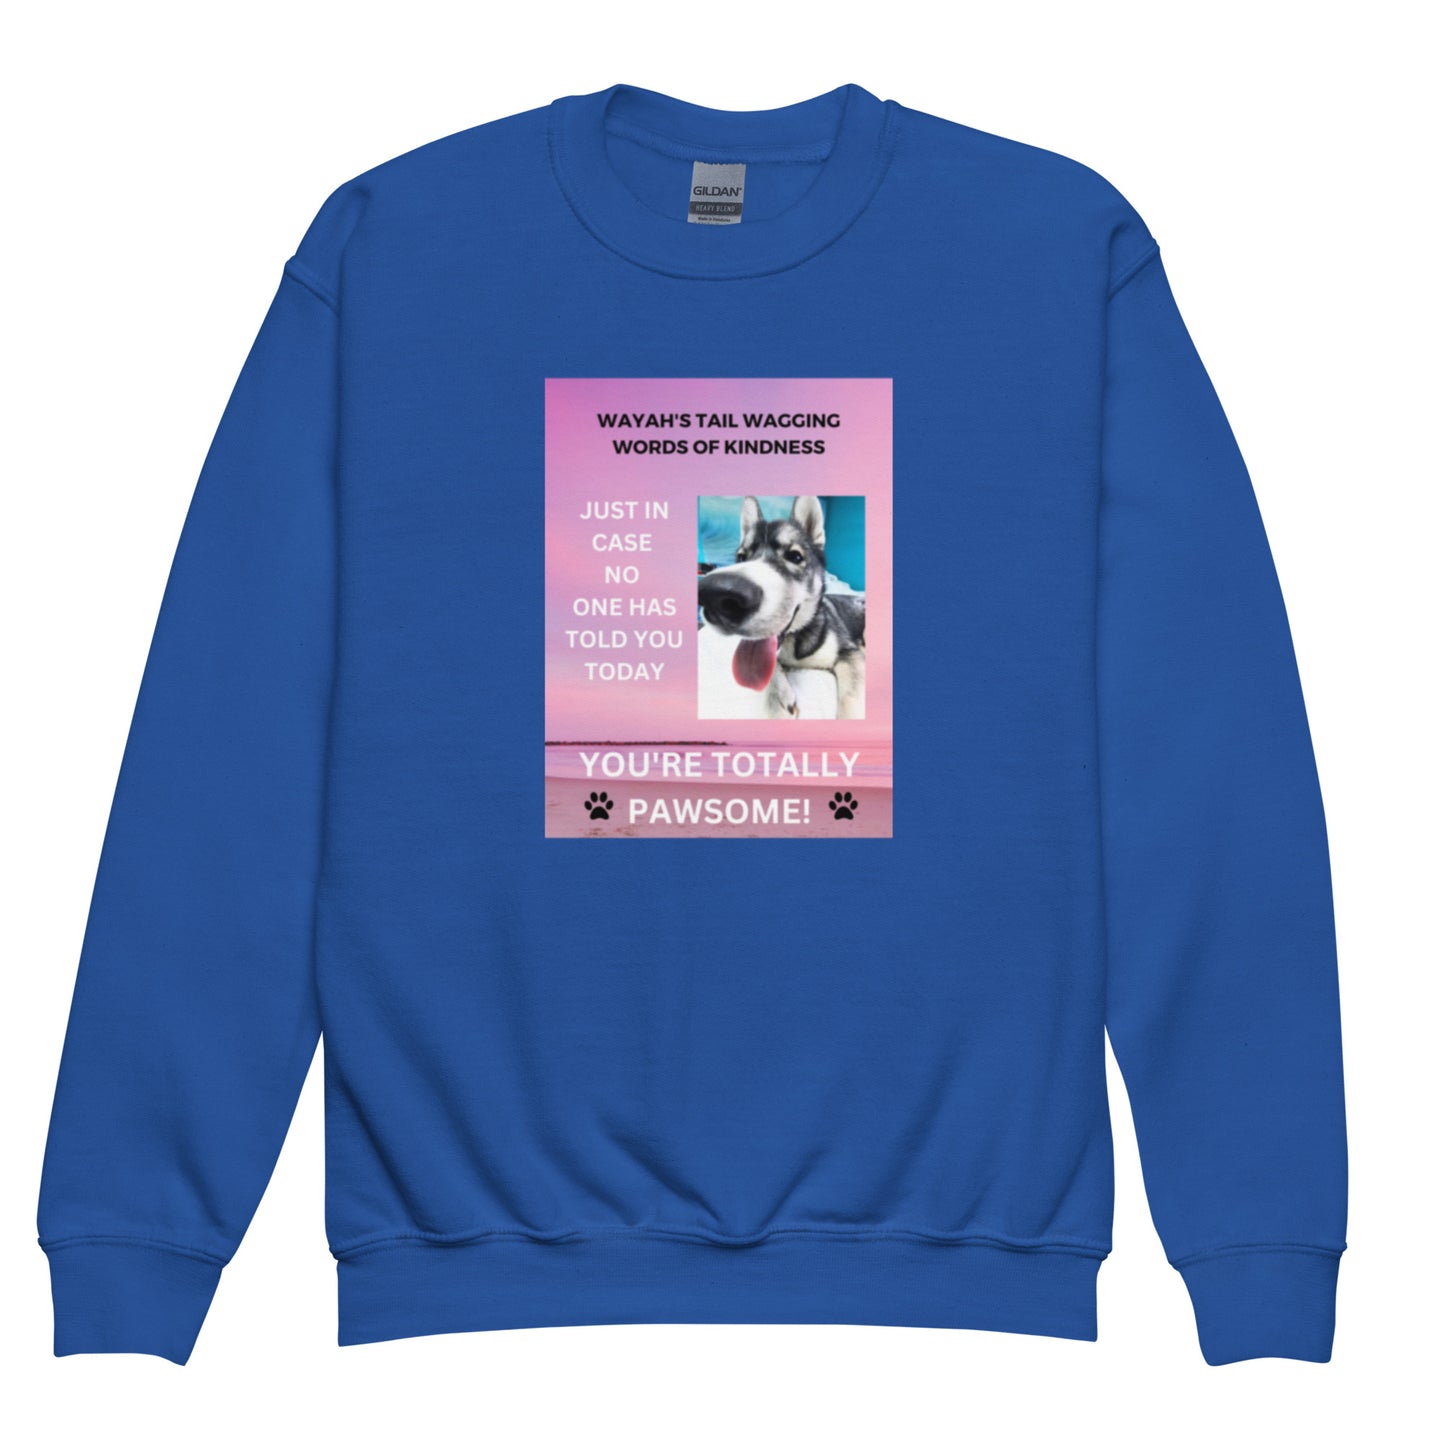 Youth crewneck sweatshirt- You're Totally Pawsome